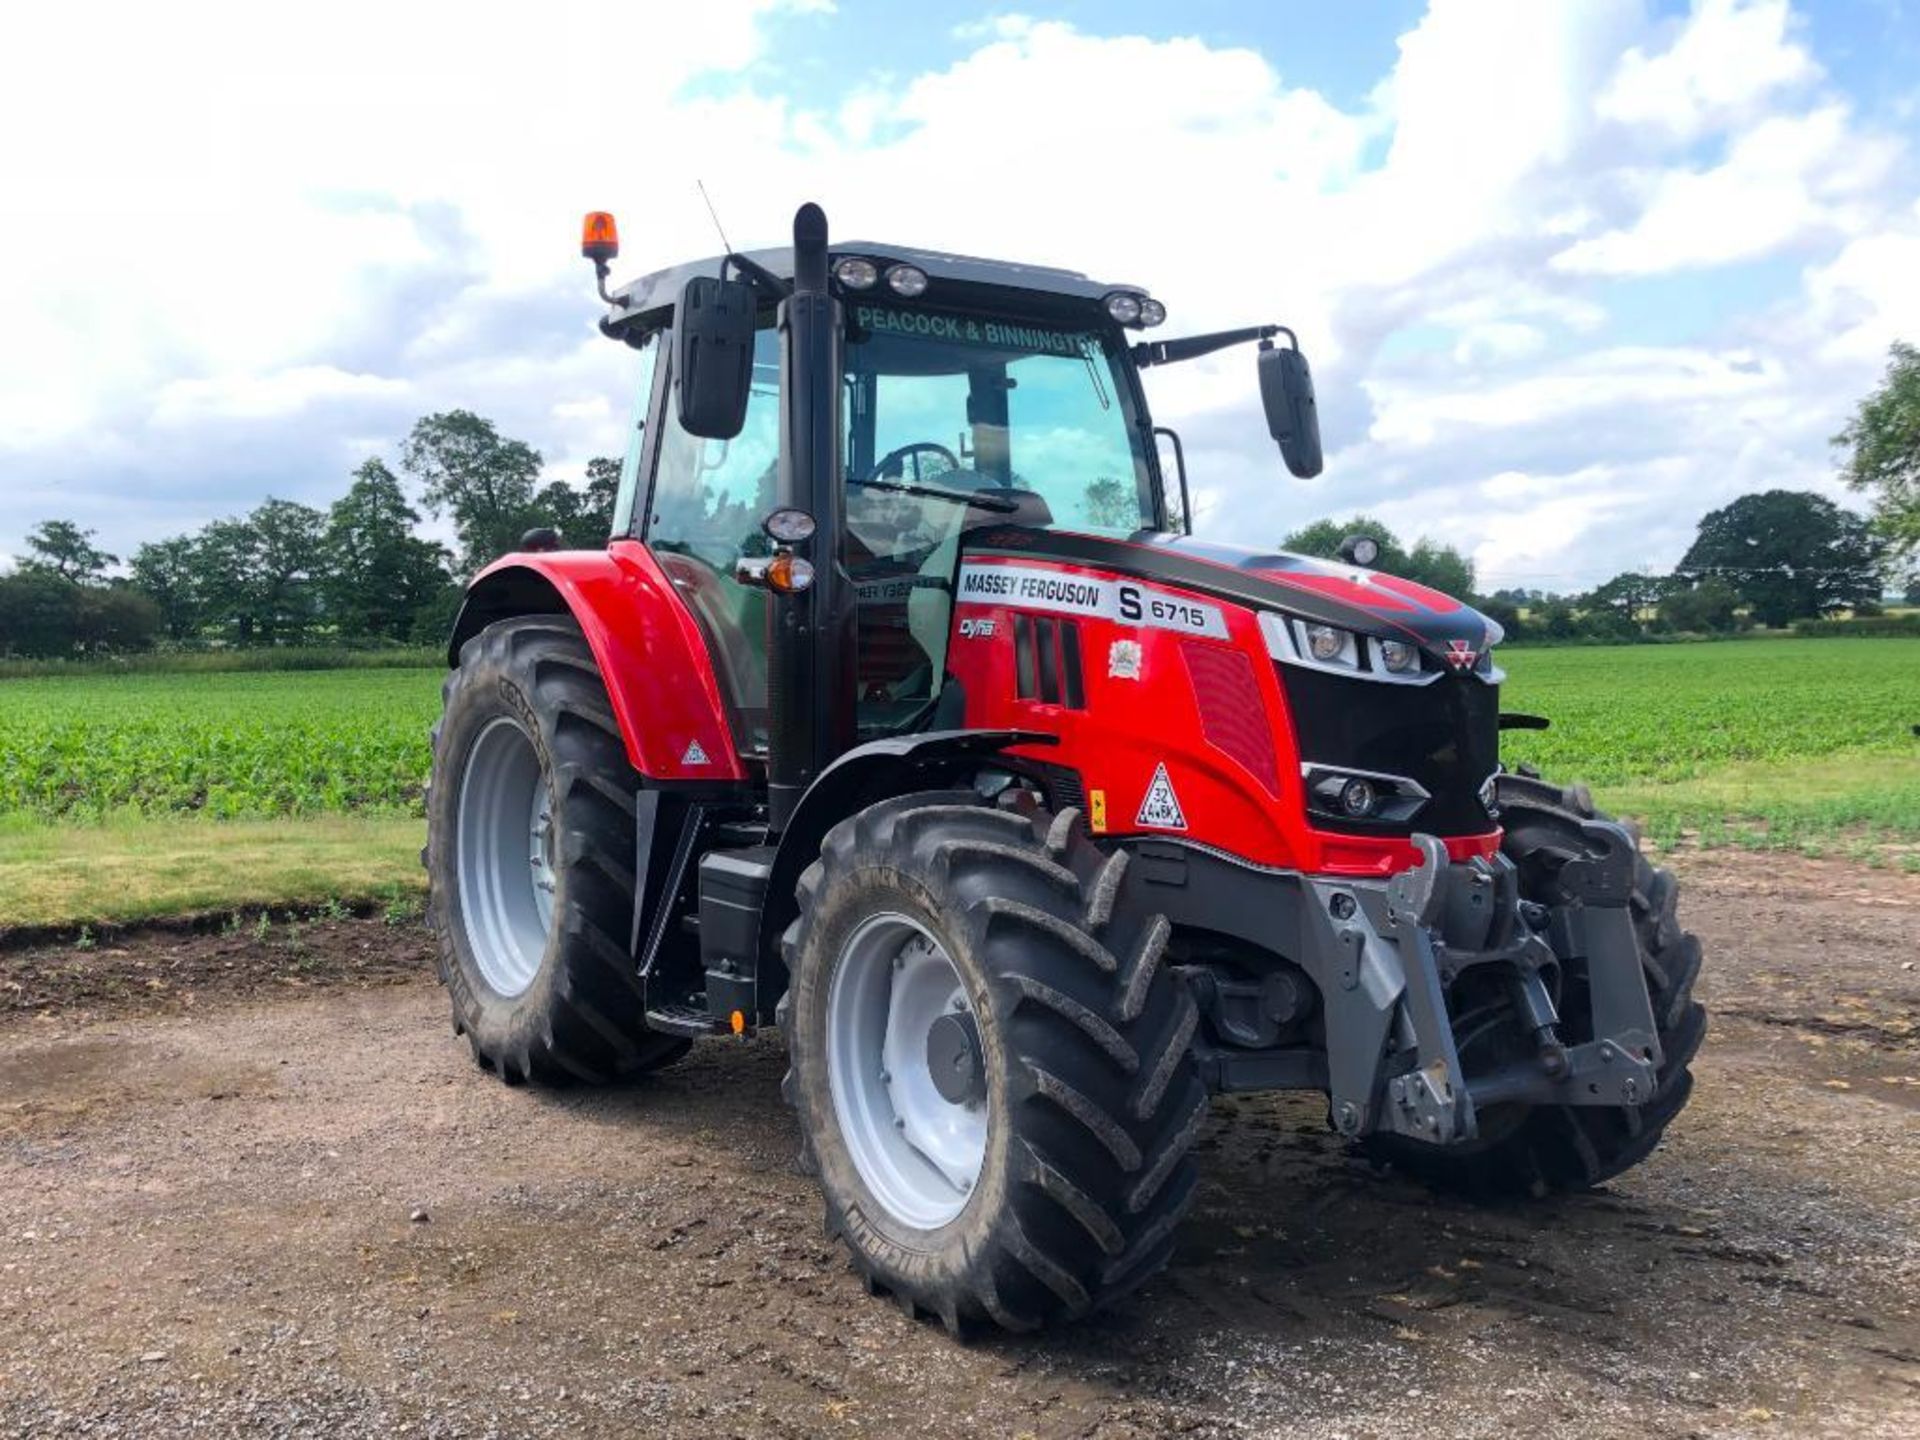 2019 Massey Ferguson 6715 S Dyna 6 50kph 4wd tractor c/w 3 manual spools, front linkage, air brakes, - Image 33 of 41